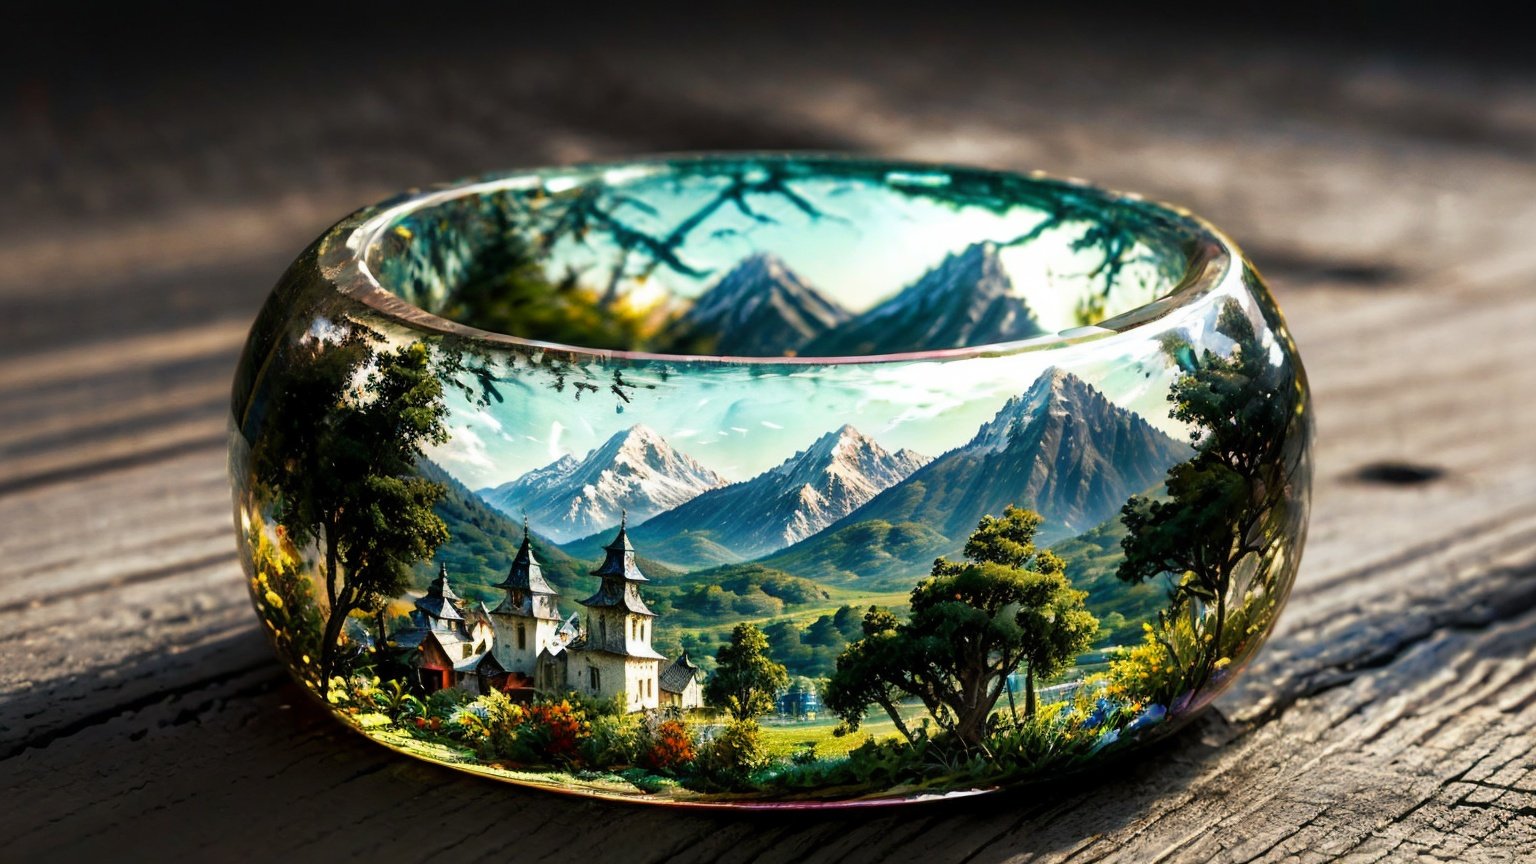 (ring:1.3), glass. Art, masterpiece, best quality, landscape, <lora:RingArt_Sora:0.8>, (style of Charles Maurice Detmold:1.3)
(masterpiece, best quality:1.5), 
Skirts, Himalayan, Hazy conditions, 